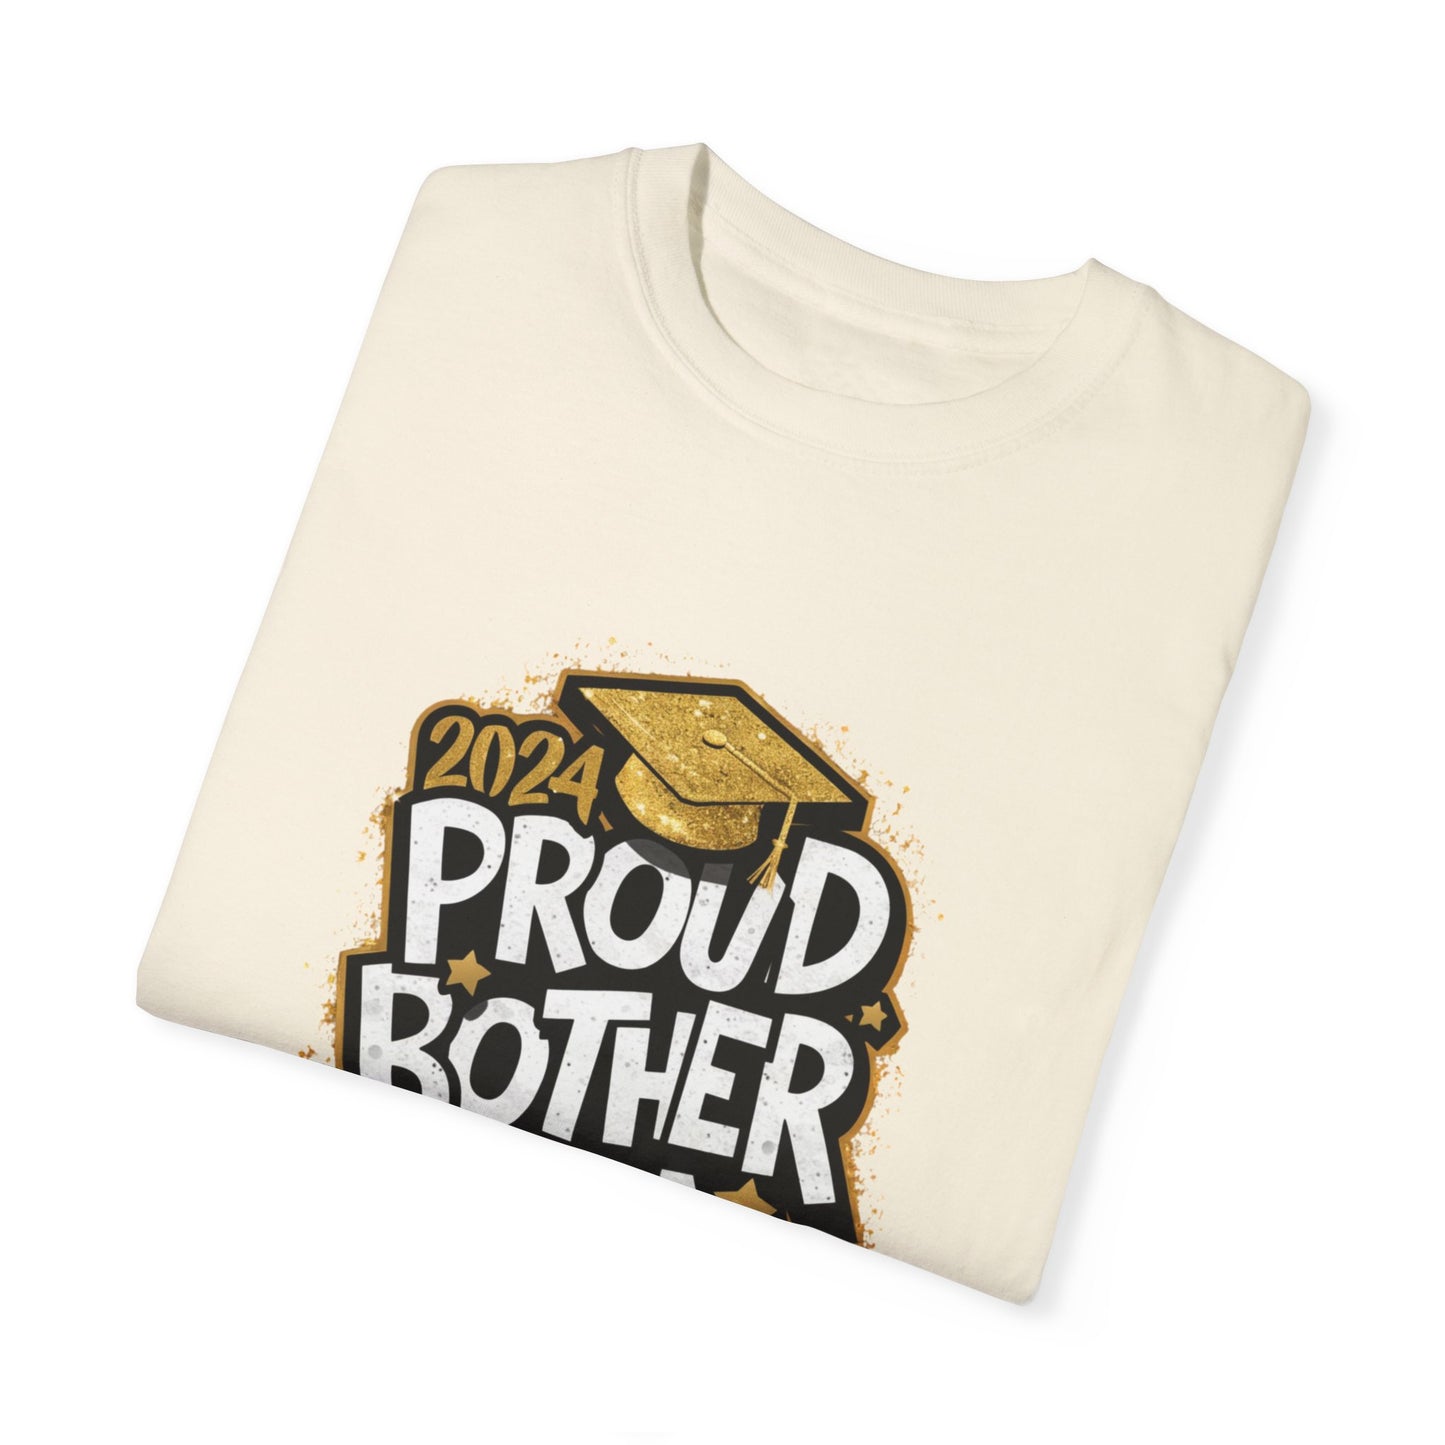 Proud Brother of a 2024 Graduate Unisex Garment-dyed T-shirt Cotton Funny Humorous Graphic Soft Premium Unisex Men Women Ivory T-shirt Birthday Gift-44